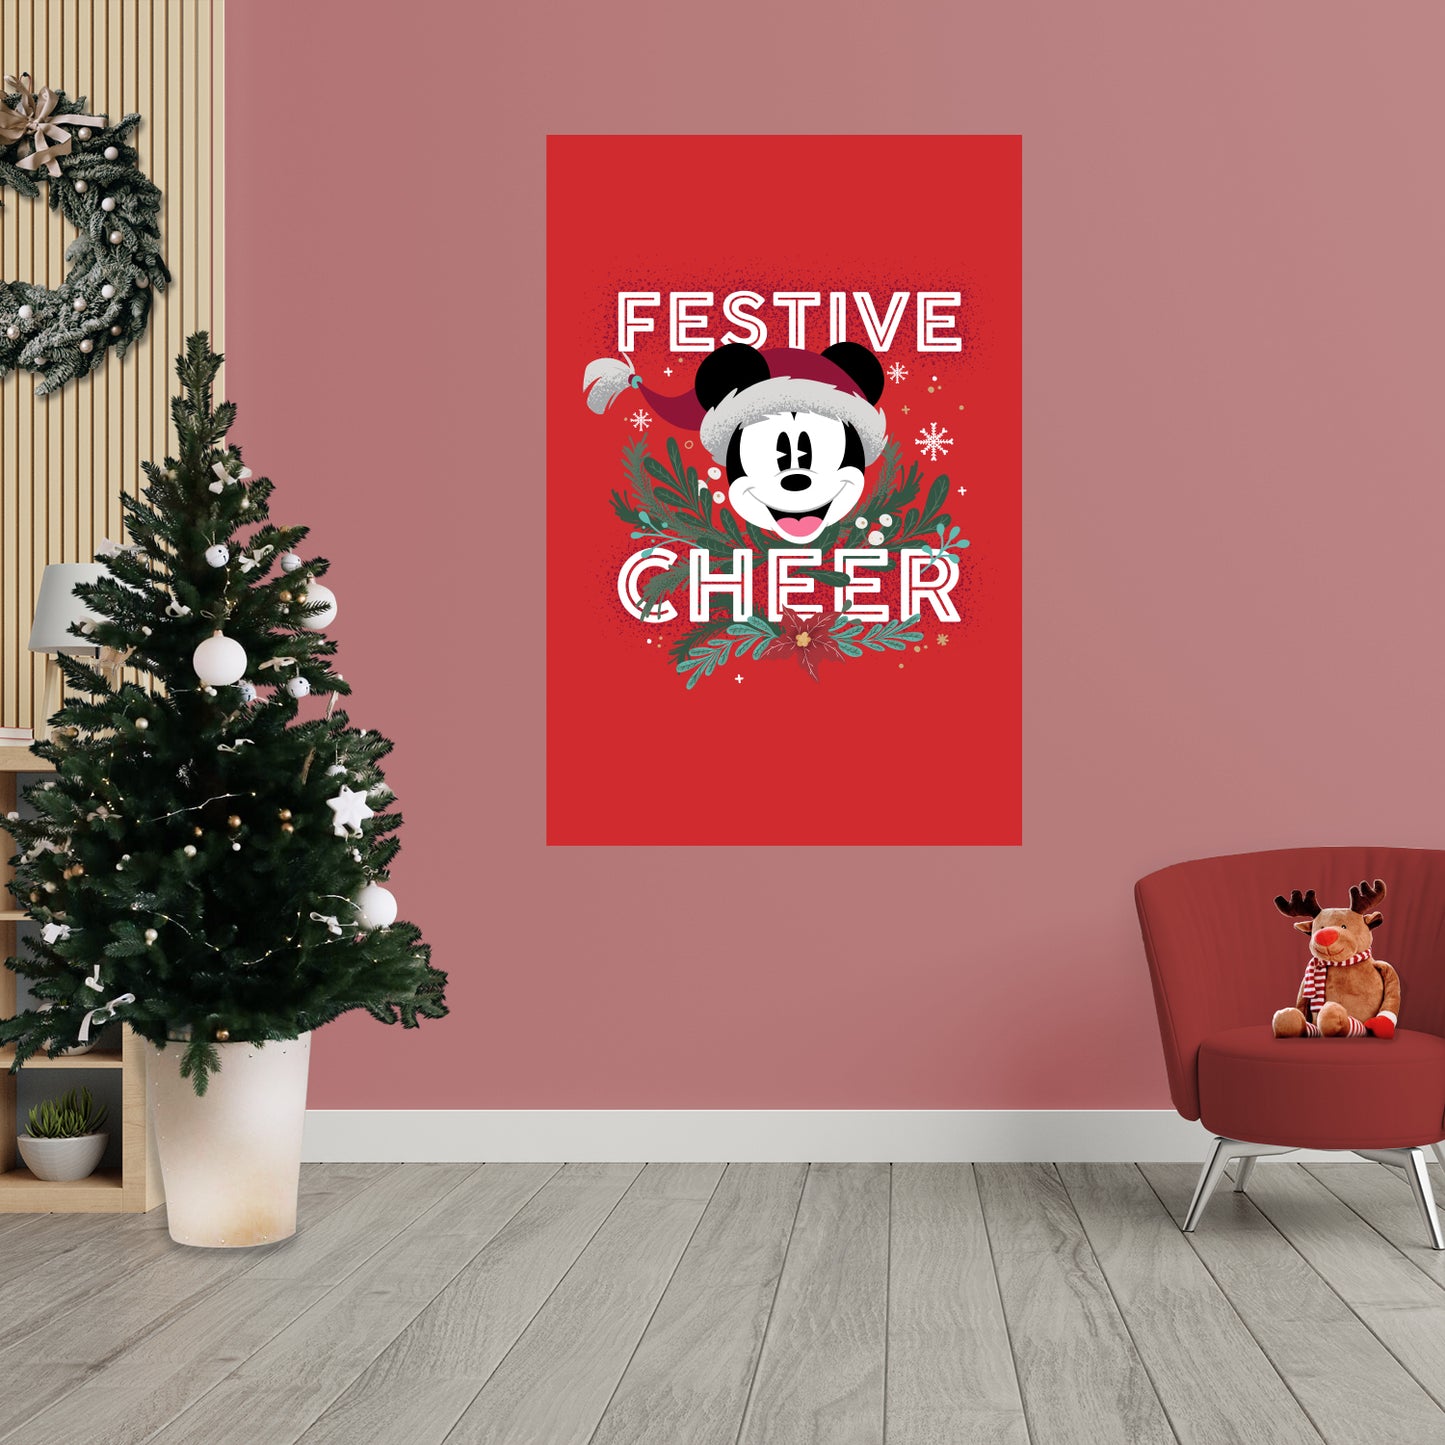 Mickey and Friends Festive Cheer: Mickey Mouse Festive Cheer Mural        - Officially Licensed Disney Removable     Adhesive Decal